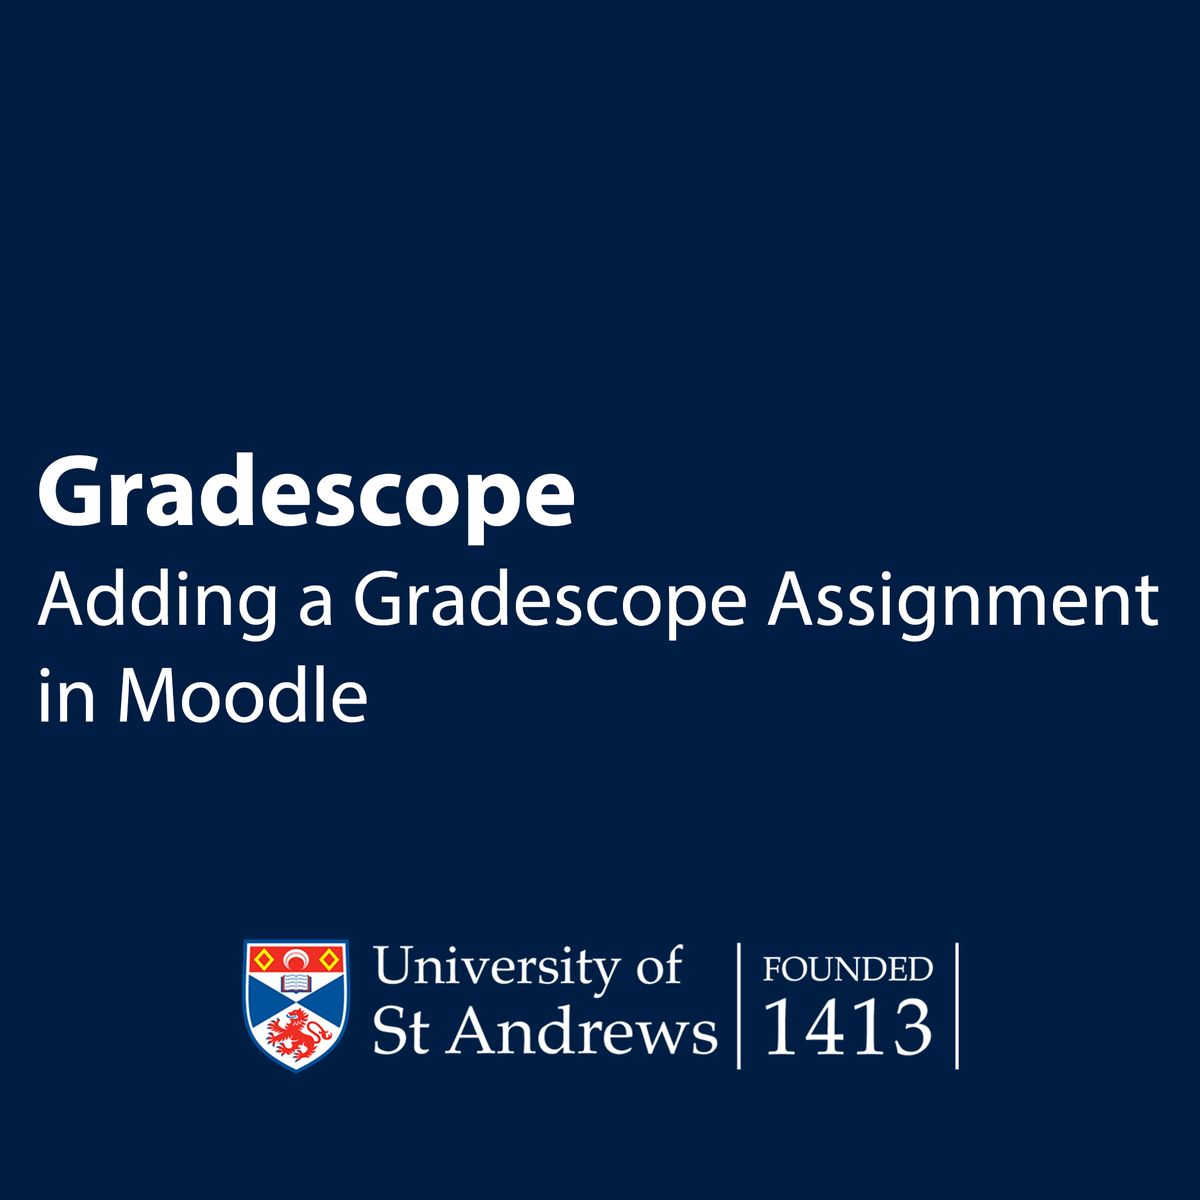 Adding a Gradescope assignment to Moodle